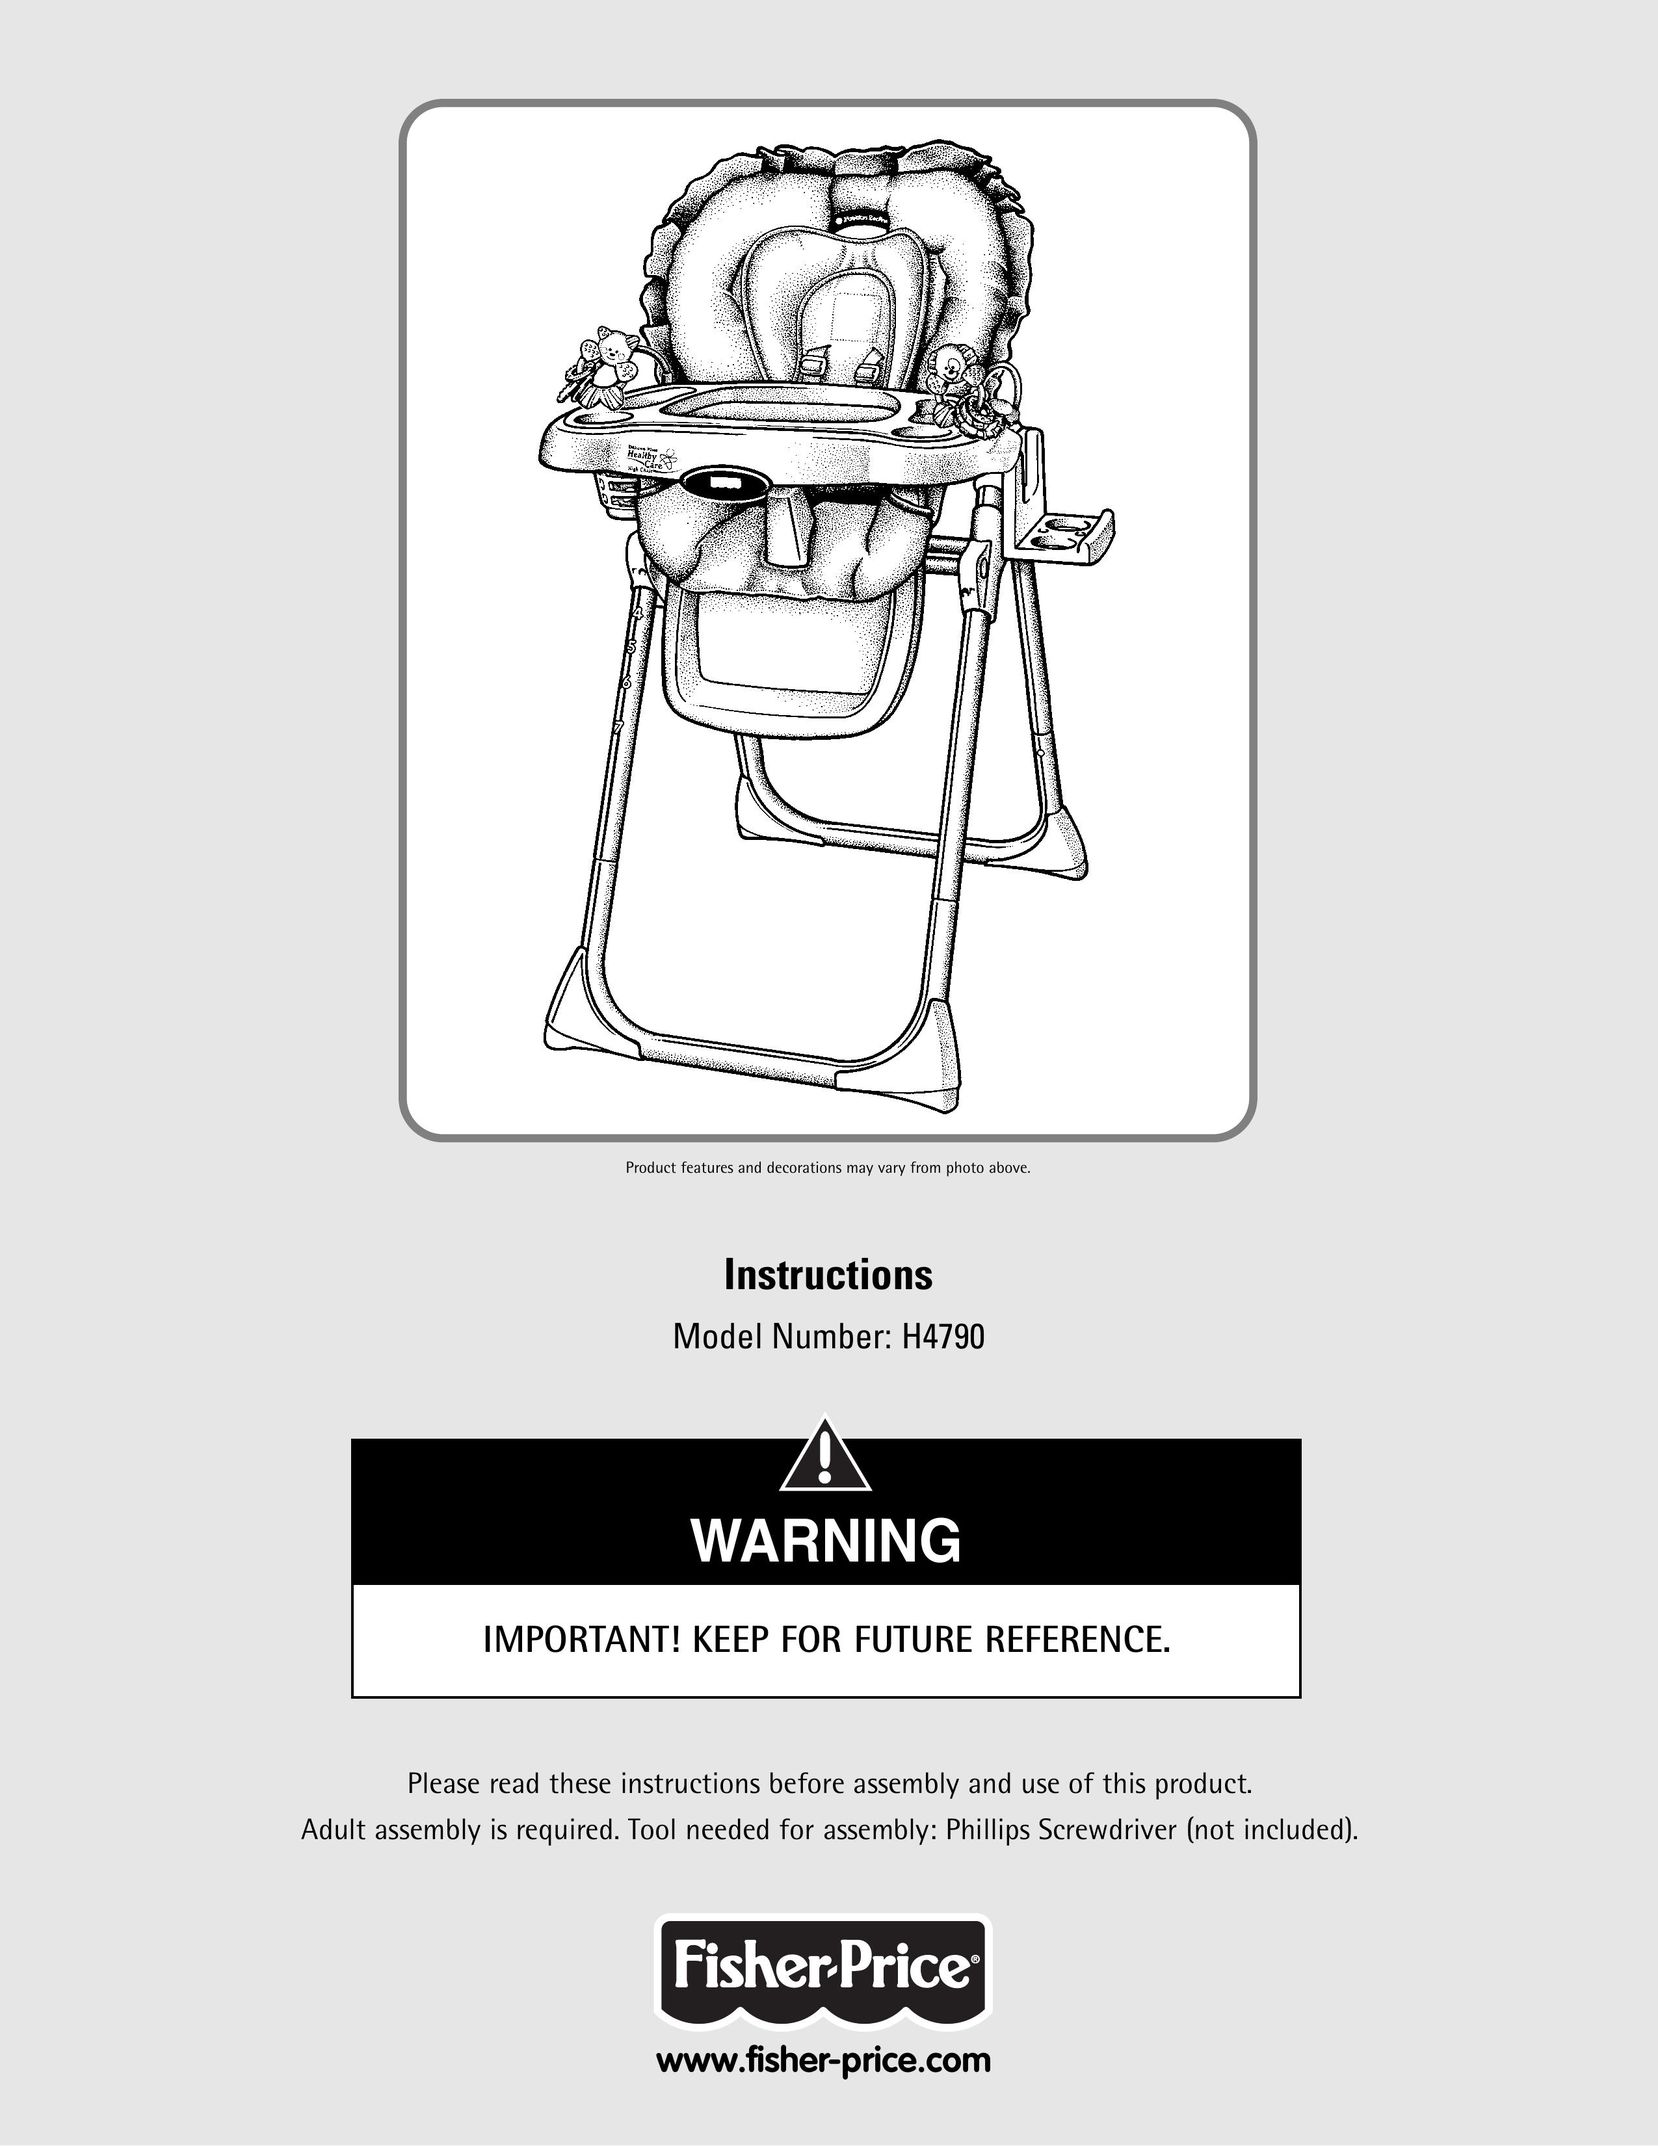 Fisher-Price H4790 High Chair User Manual